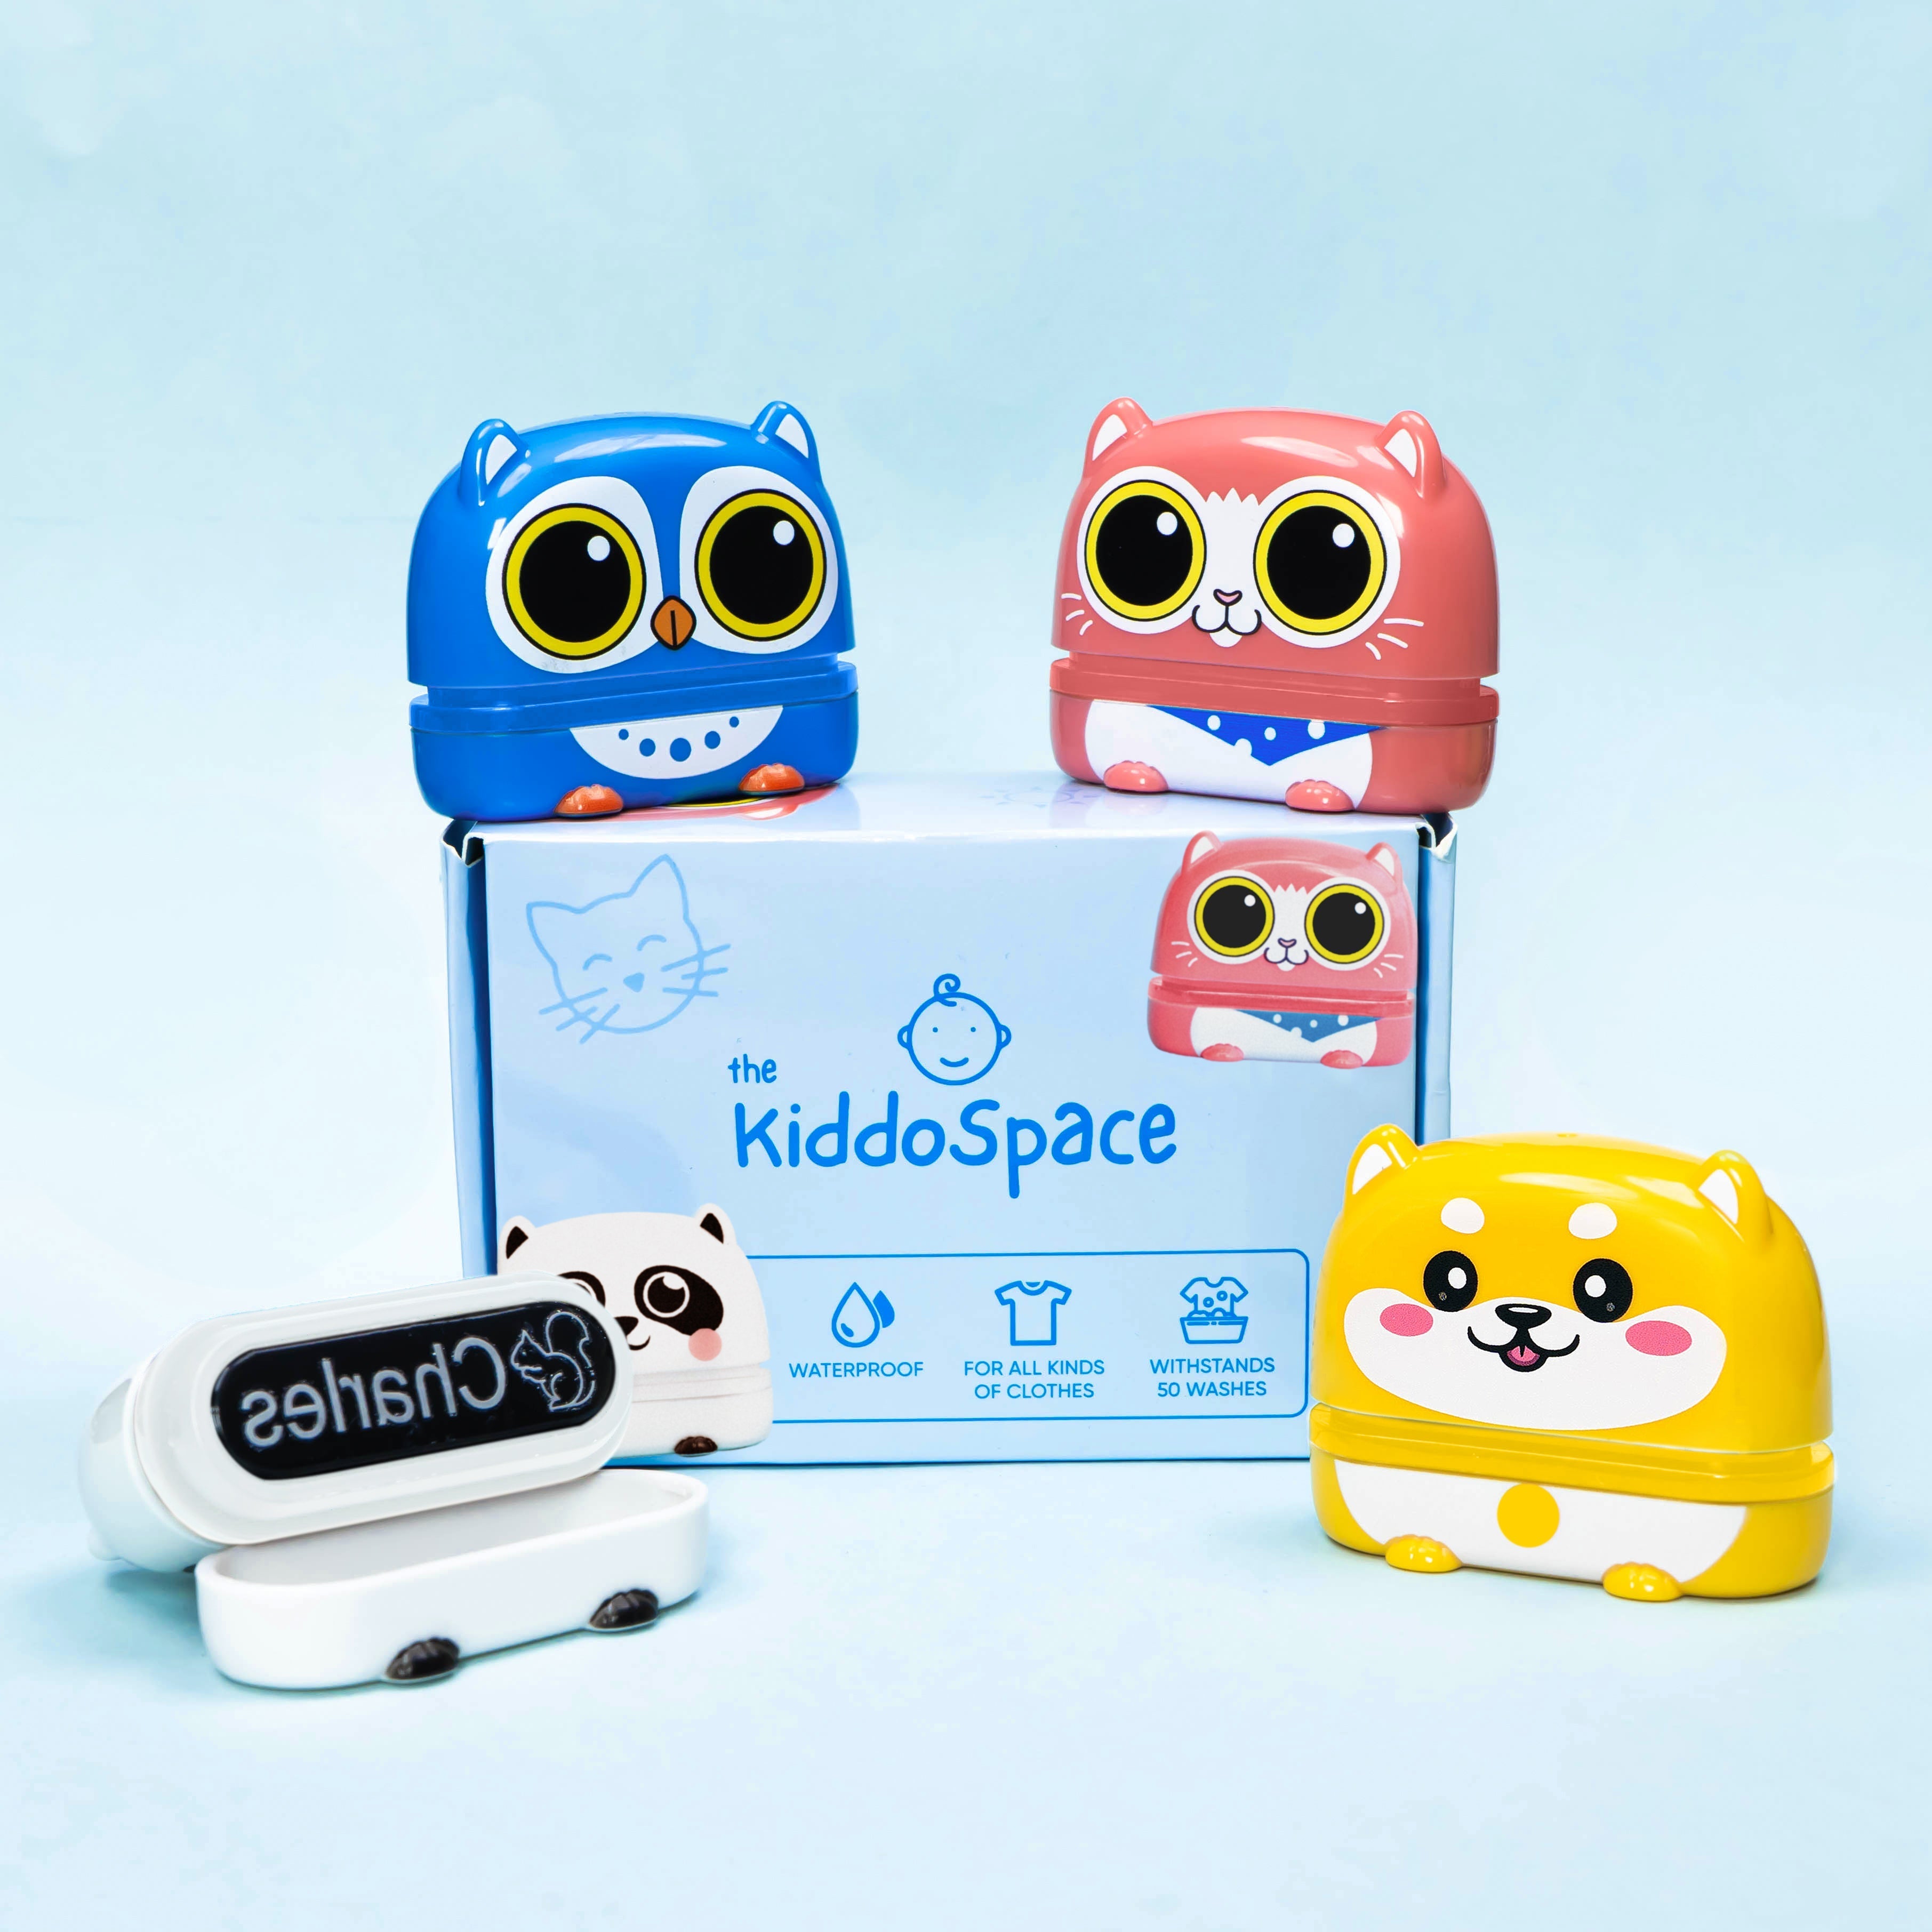  Icesoore Kiddostamp - Customized Name Stamp, Kiddo Stamp,  Customized Name Stamp for Clothing, Personalized Stamp for Clothes,  Waterproof, with Ink (1 Yellow Dog) : Office Products